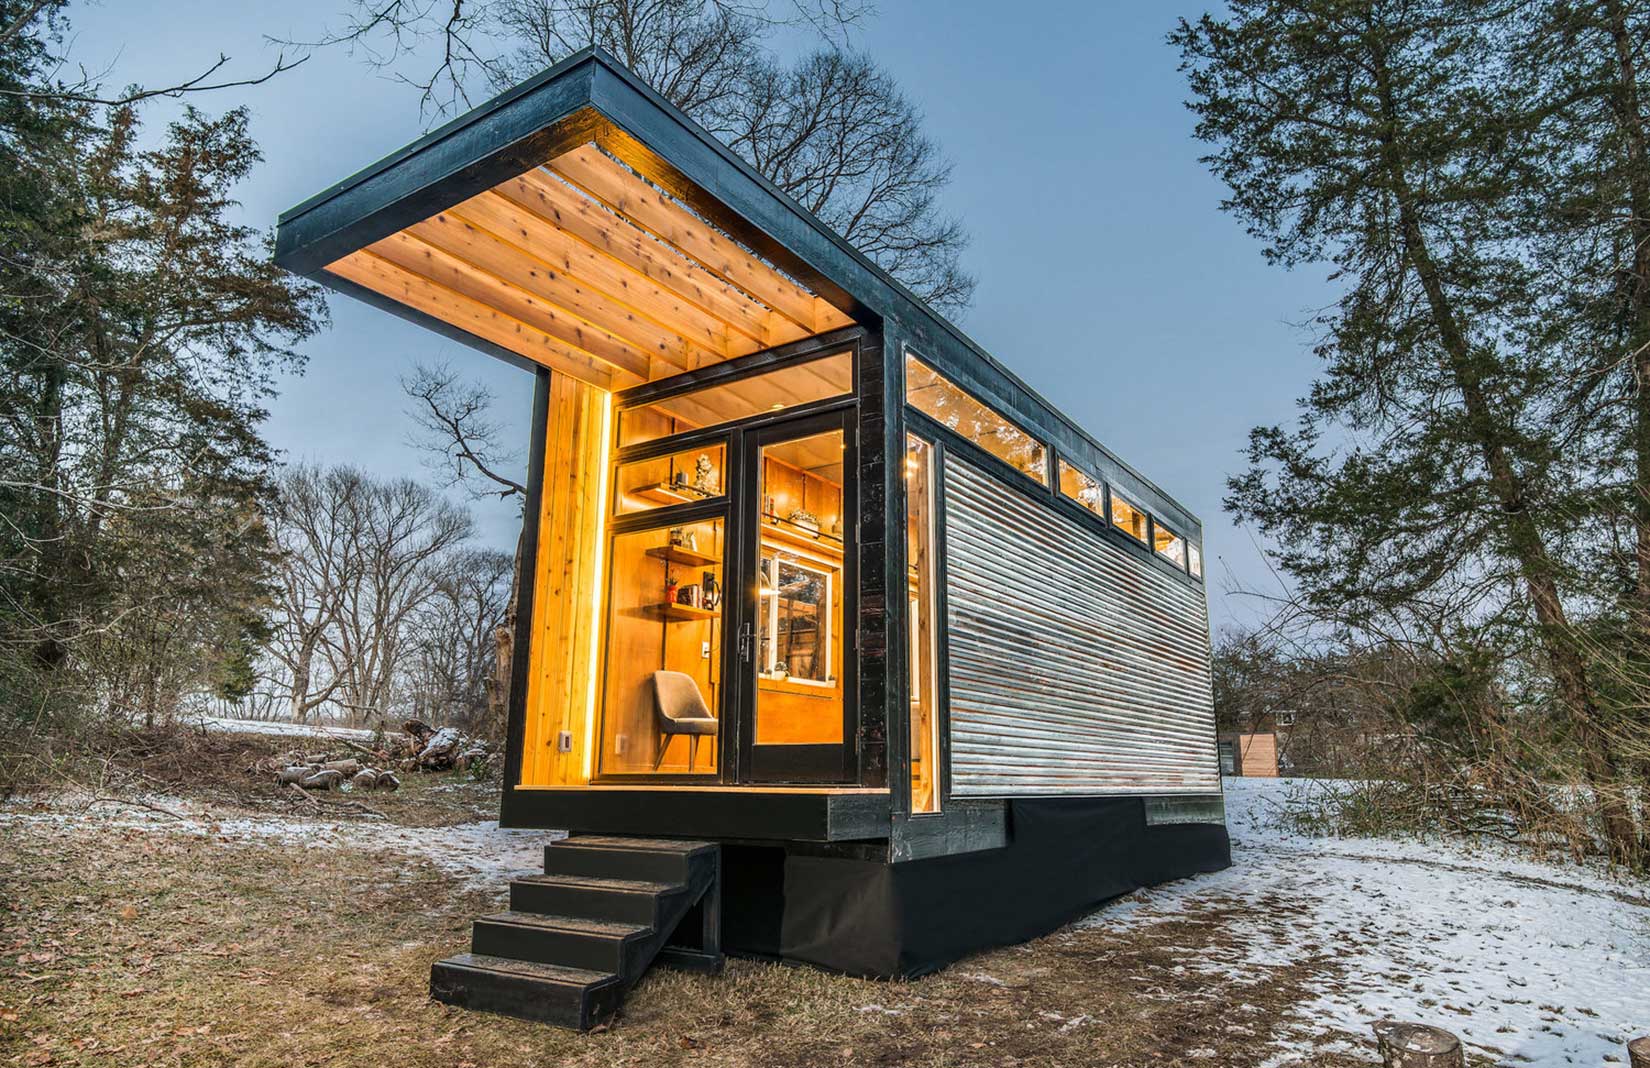 The Cornelia cabin from New Frontier Tiny Homes